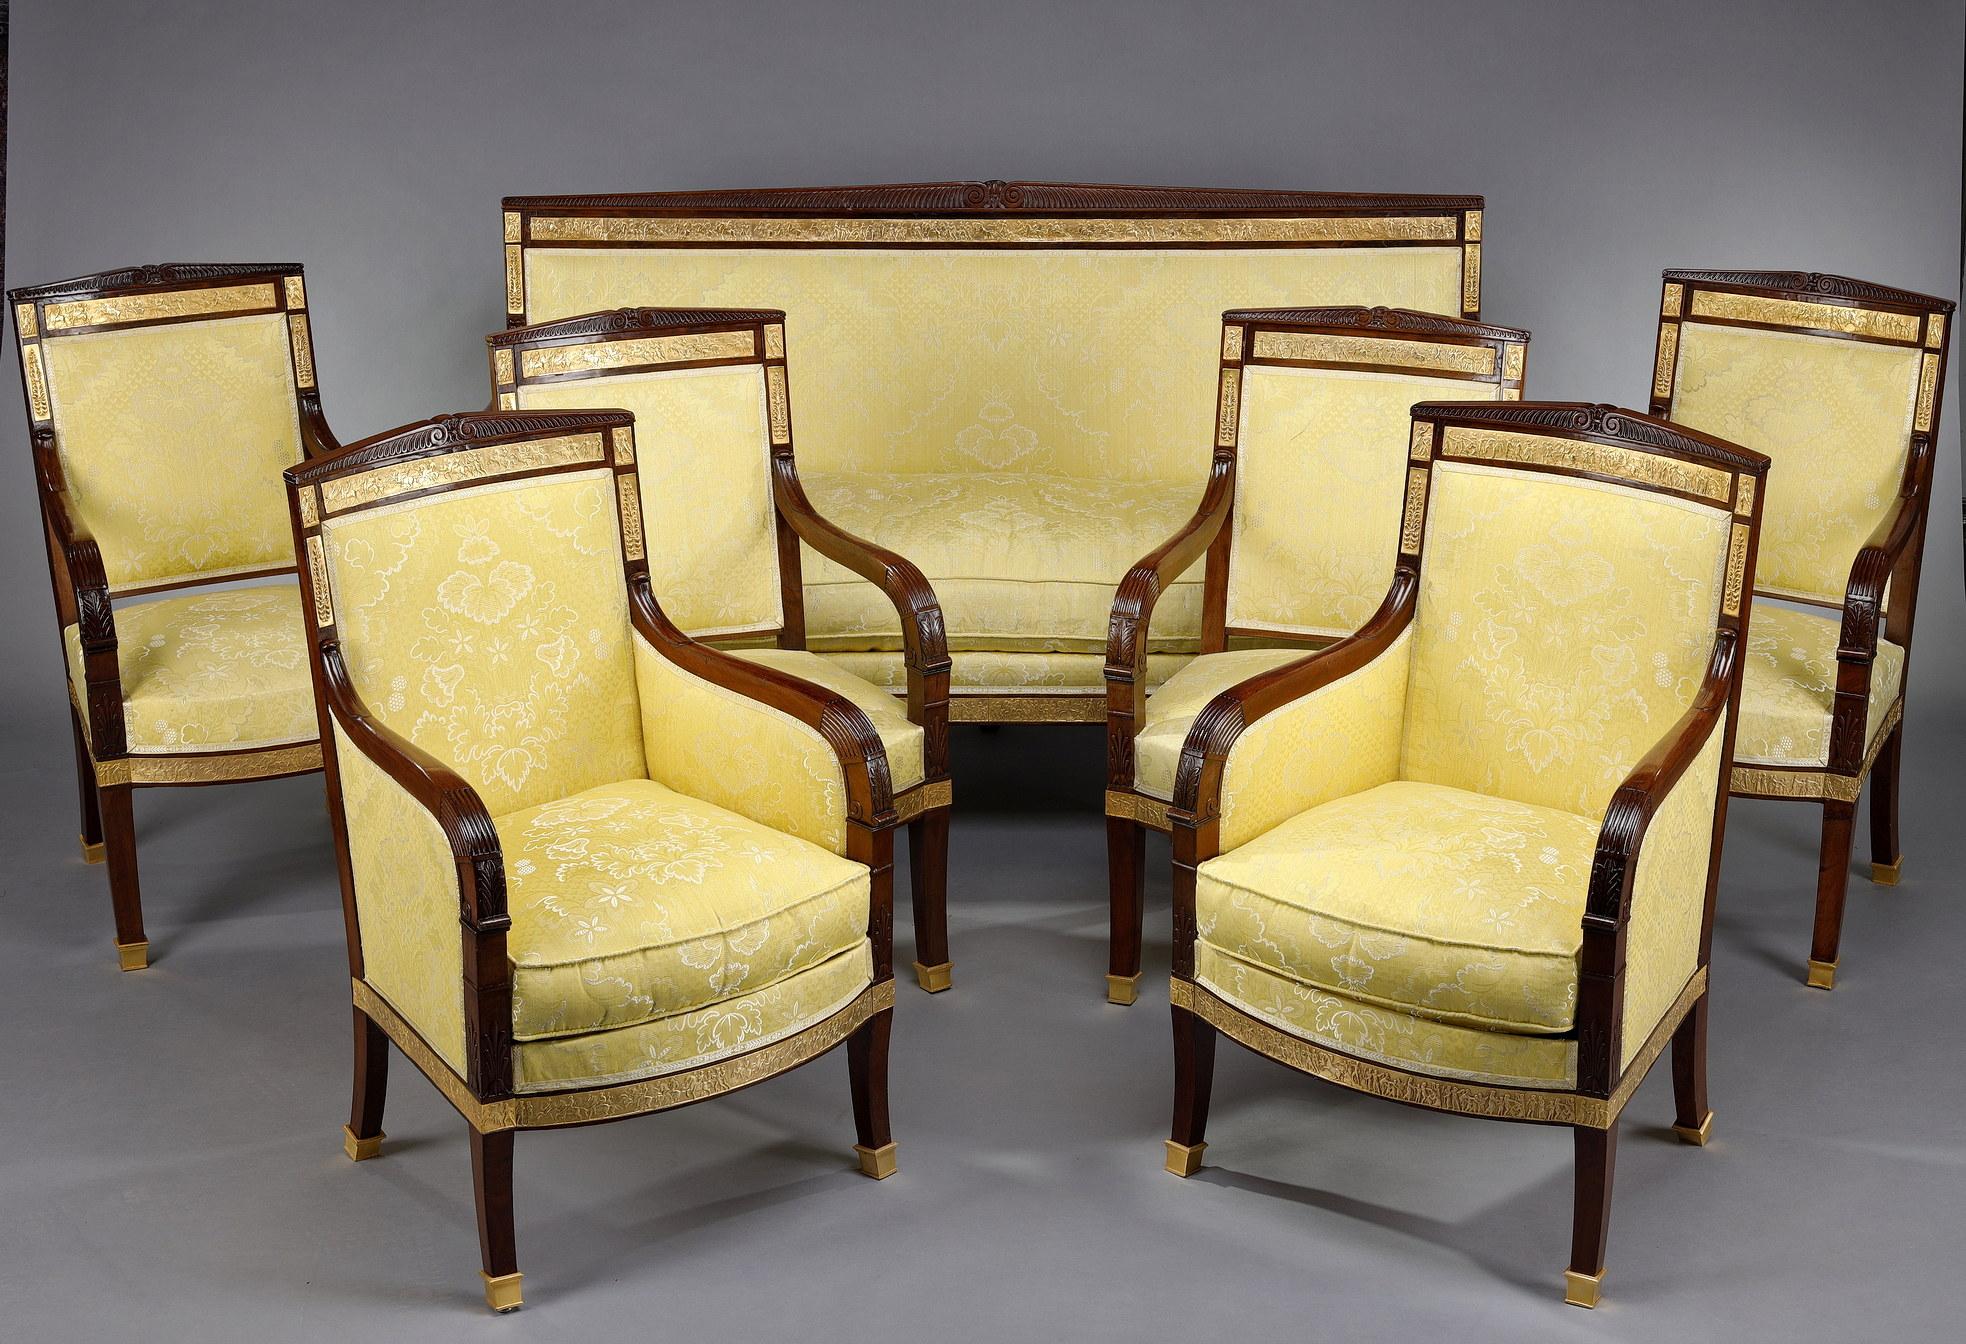 Early 19th-century salon with a suite of four armchairs, two bergères and a sofa in carved mahogany, decorated with gilded bronze mounts and chased in relief with scenes from Roman history. Pedimented backs and saber feet.